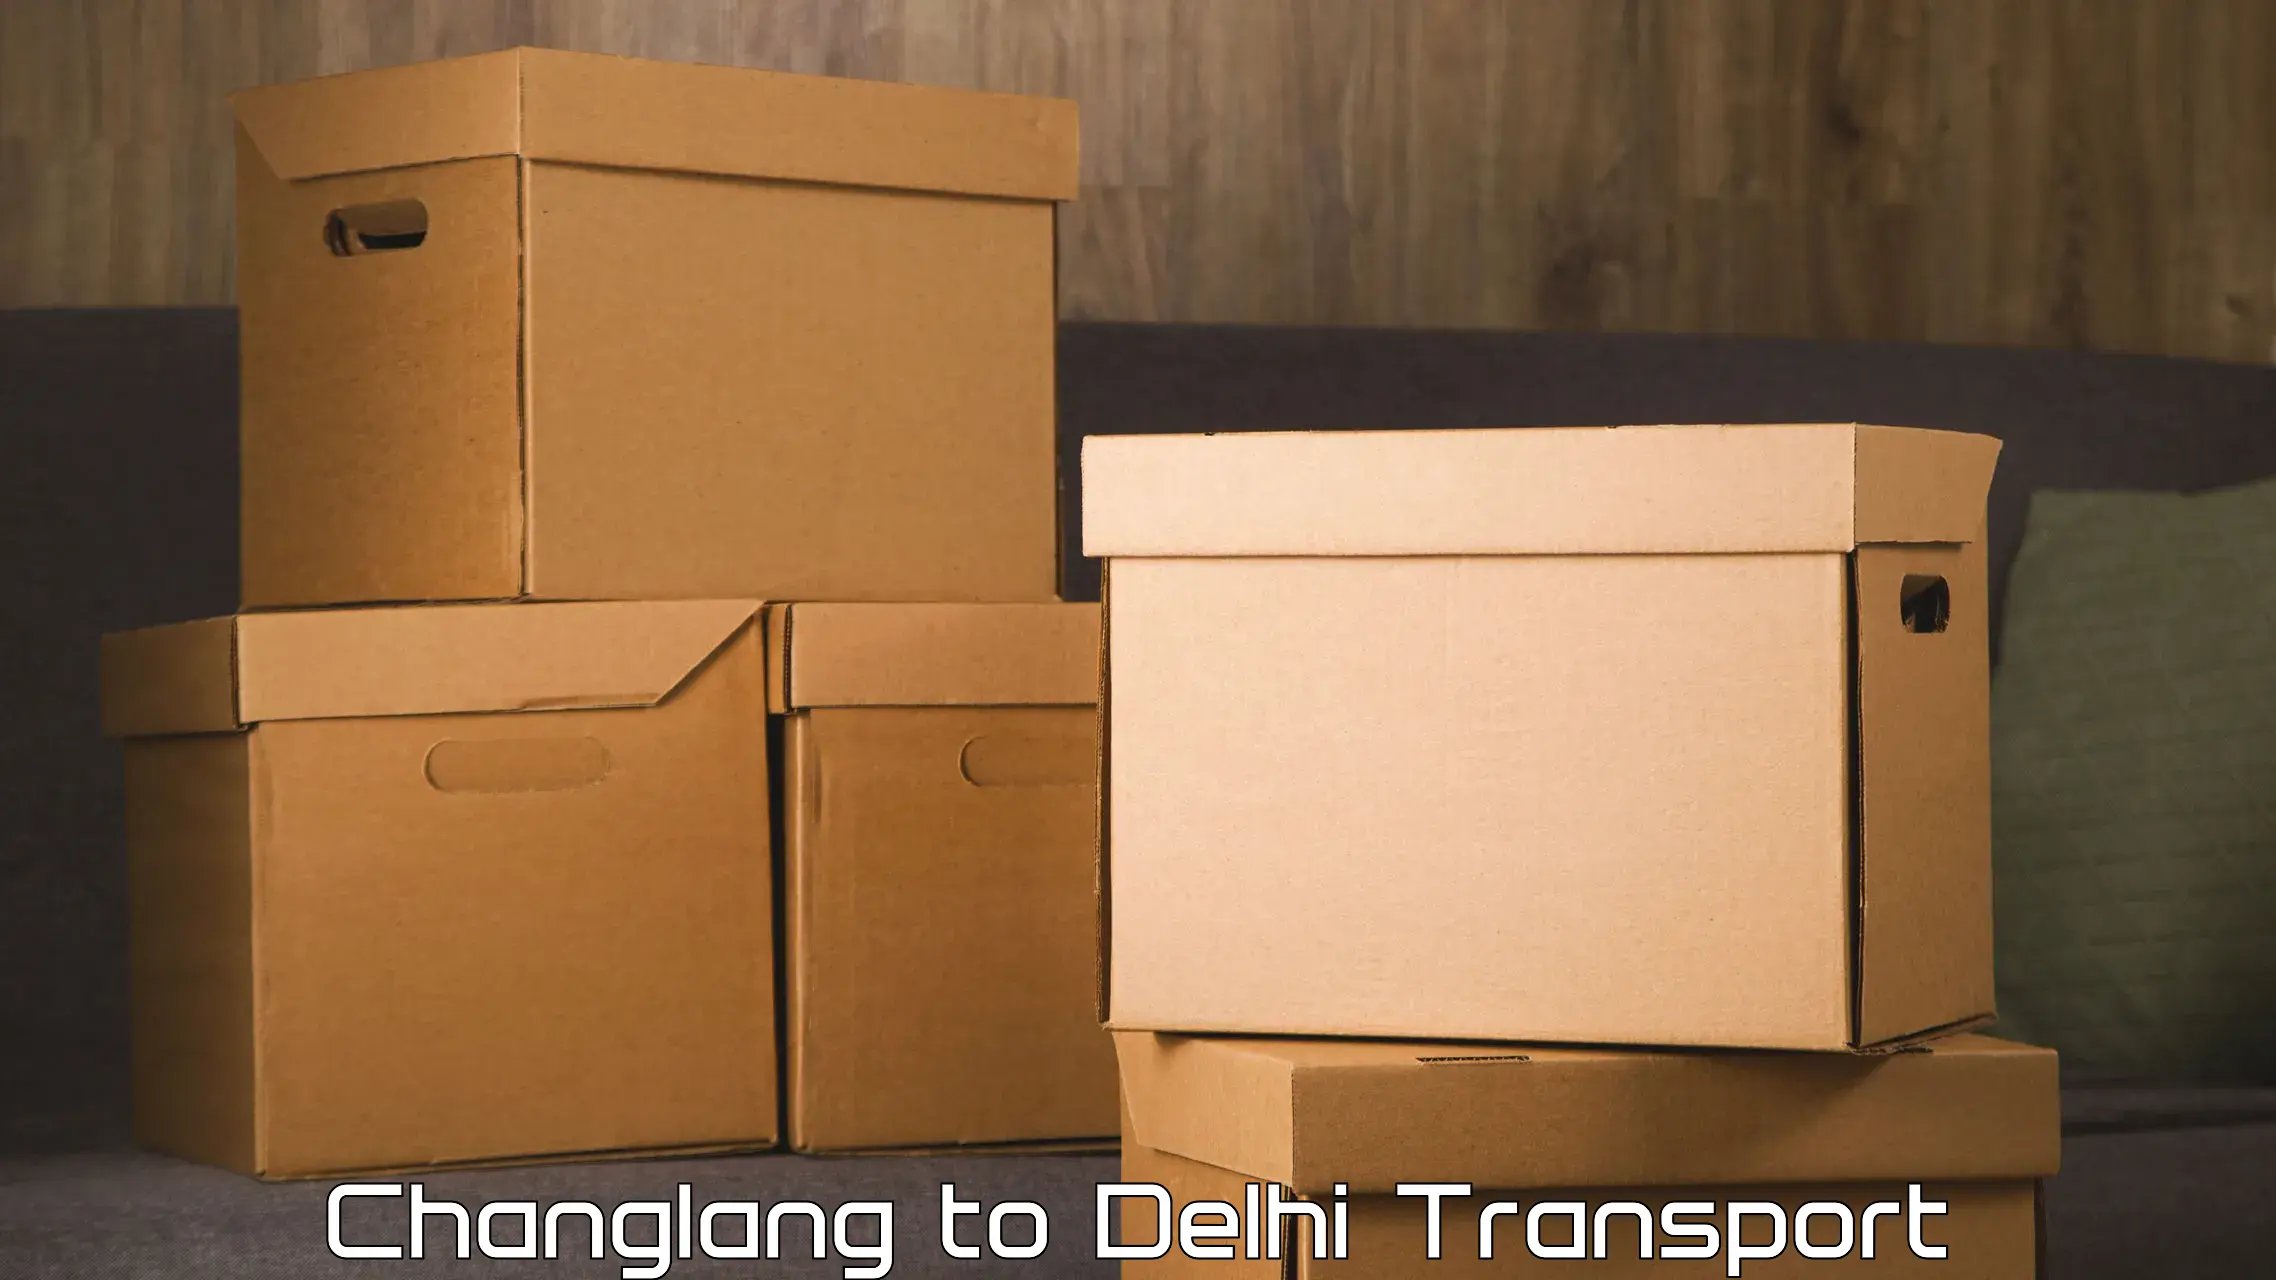 Two wheeler transport services Changlang to Delhi